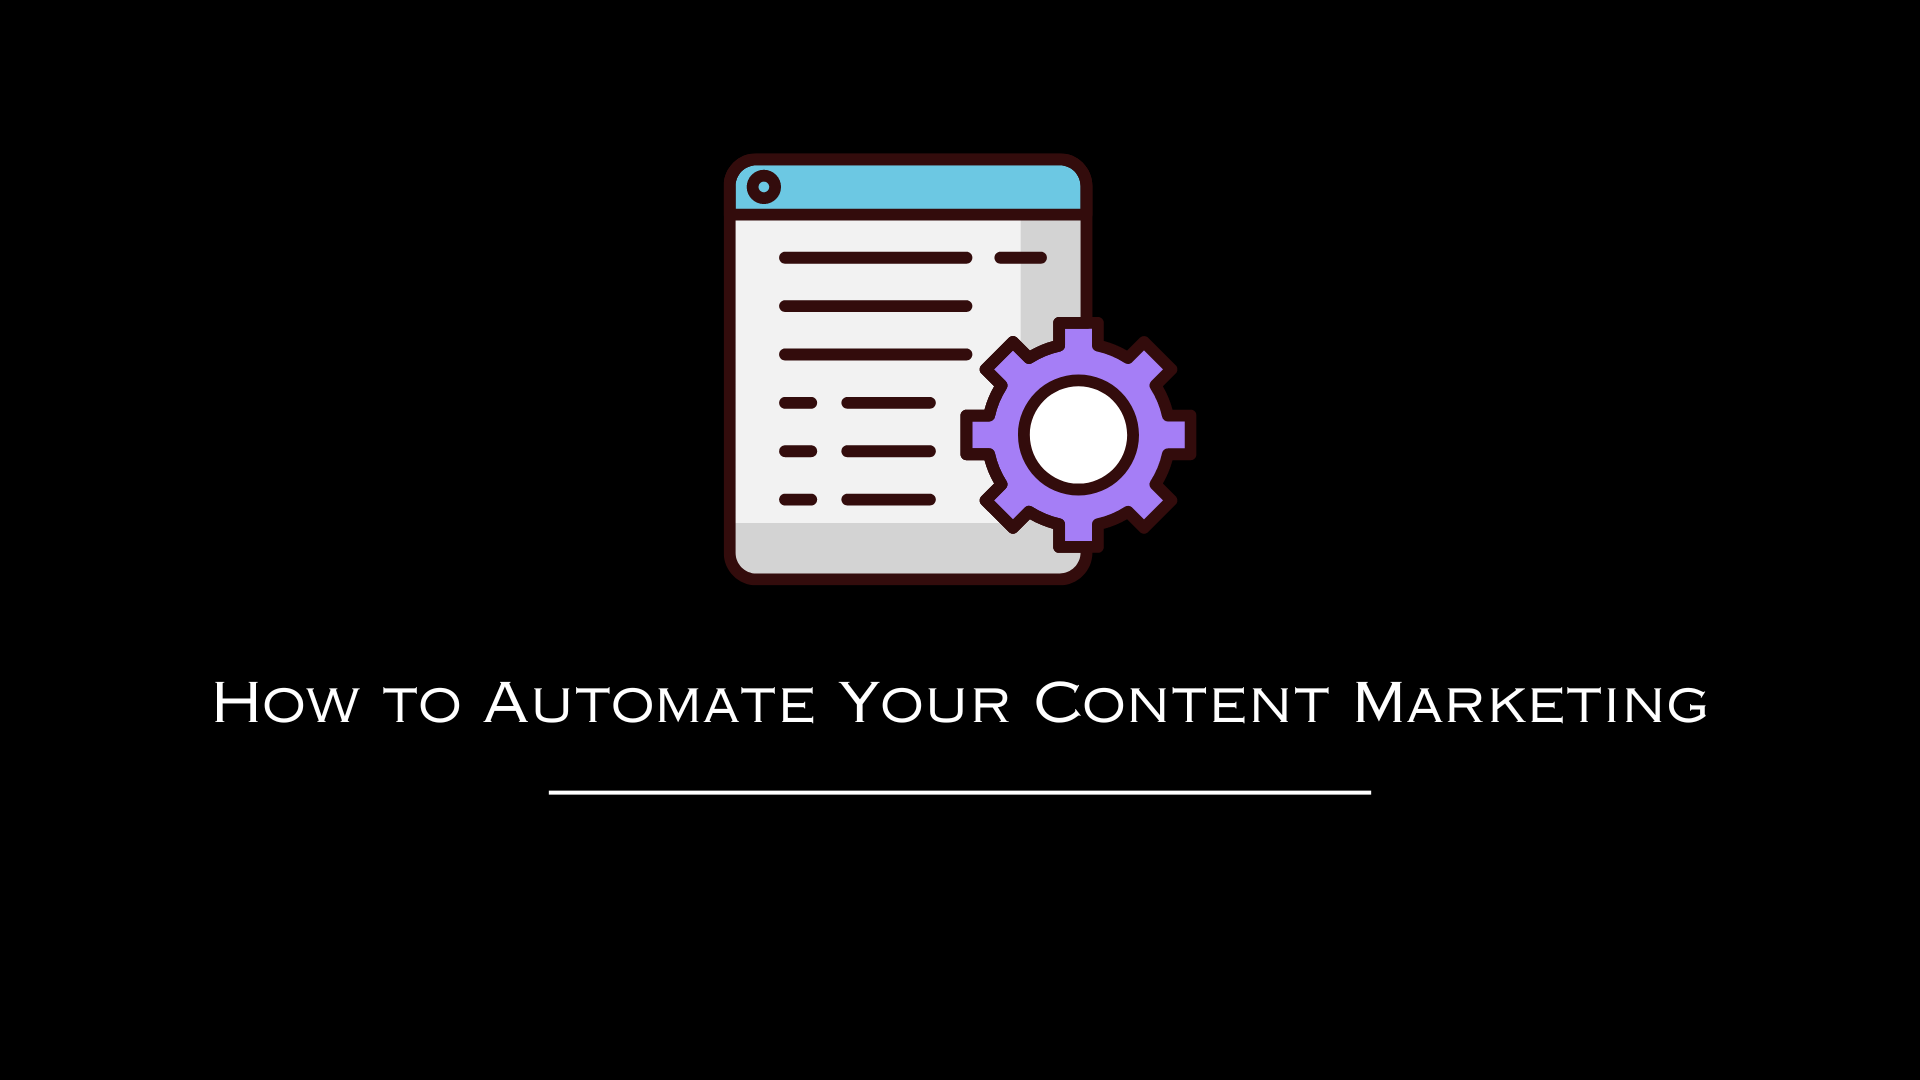 How to Automate Your Content Marketing